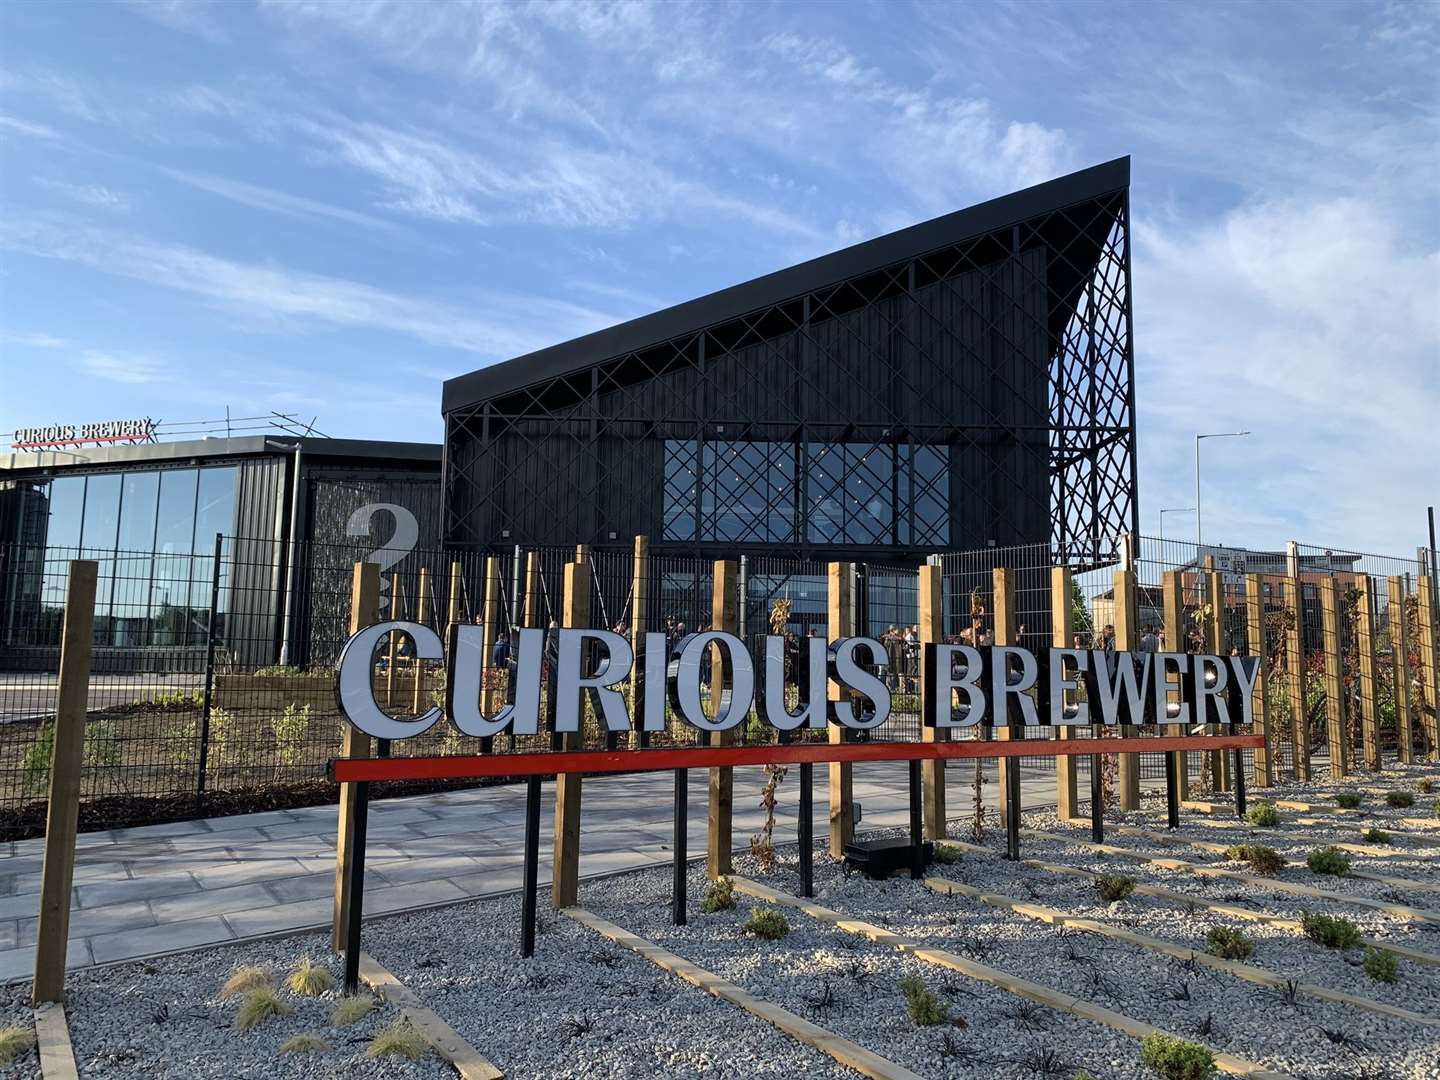 The Curious Brewery opened in May